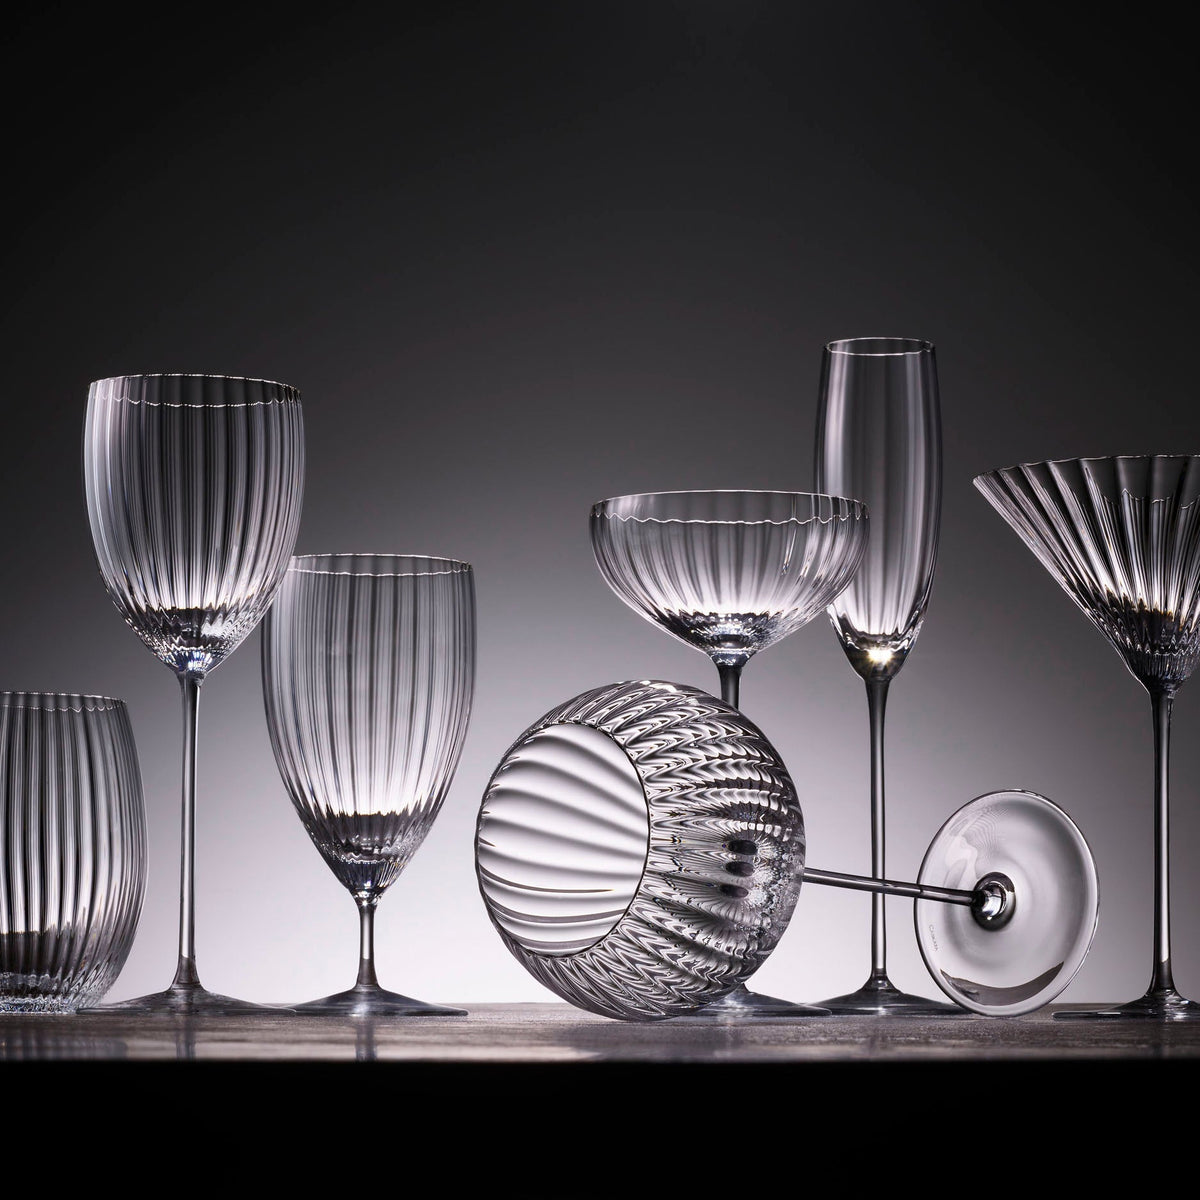 A group of Caskata Artisanal Home Quinn Clear Everyday Glasses on a table in front of a dark background.